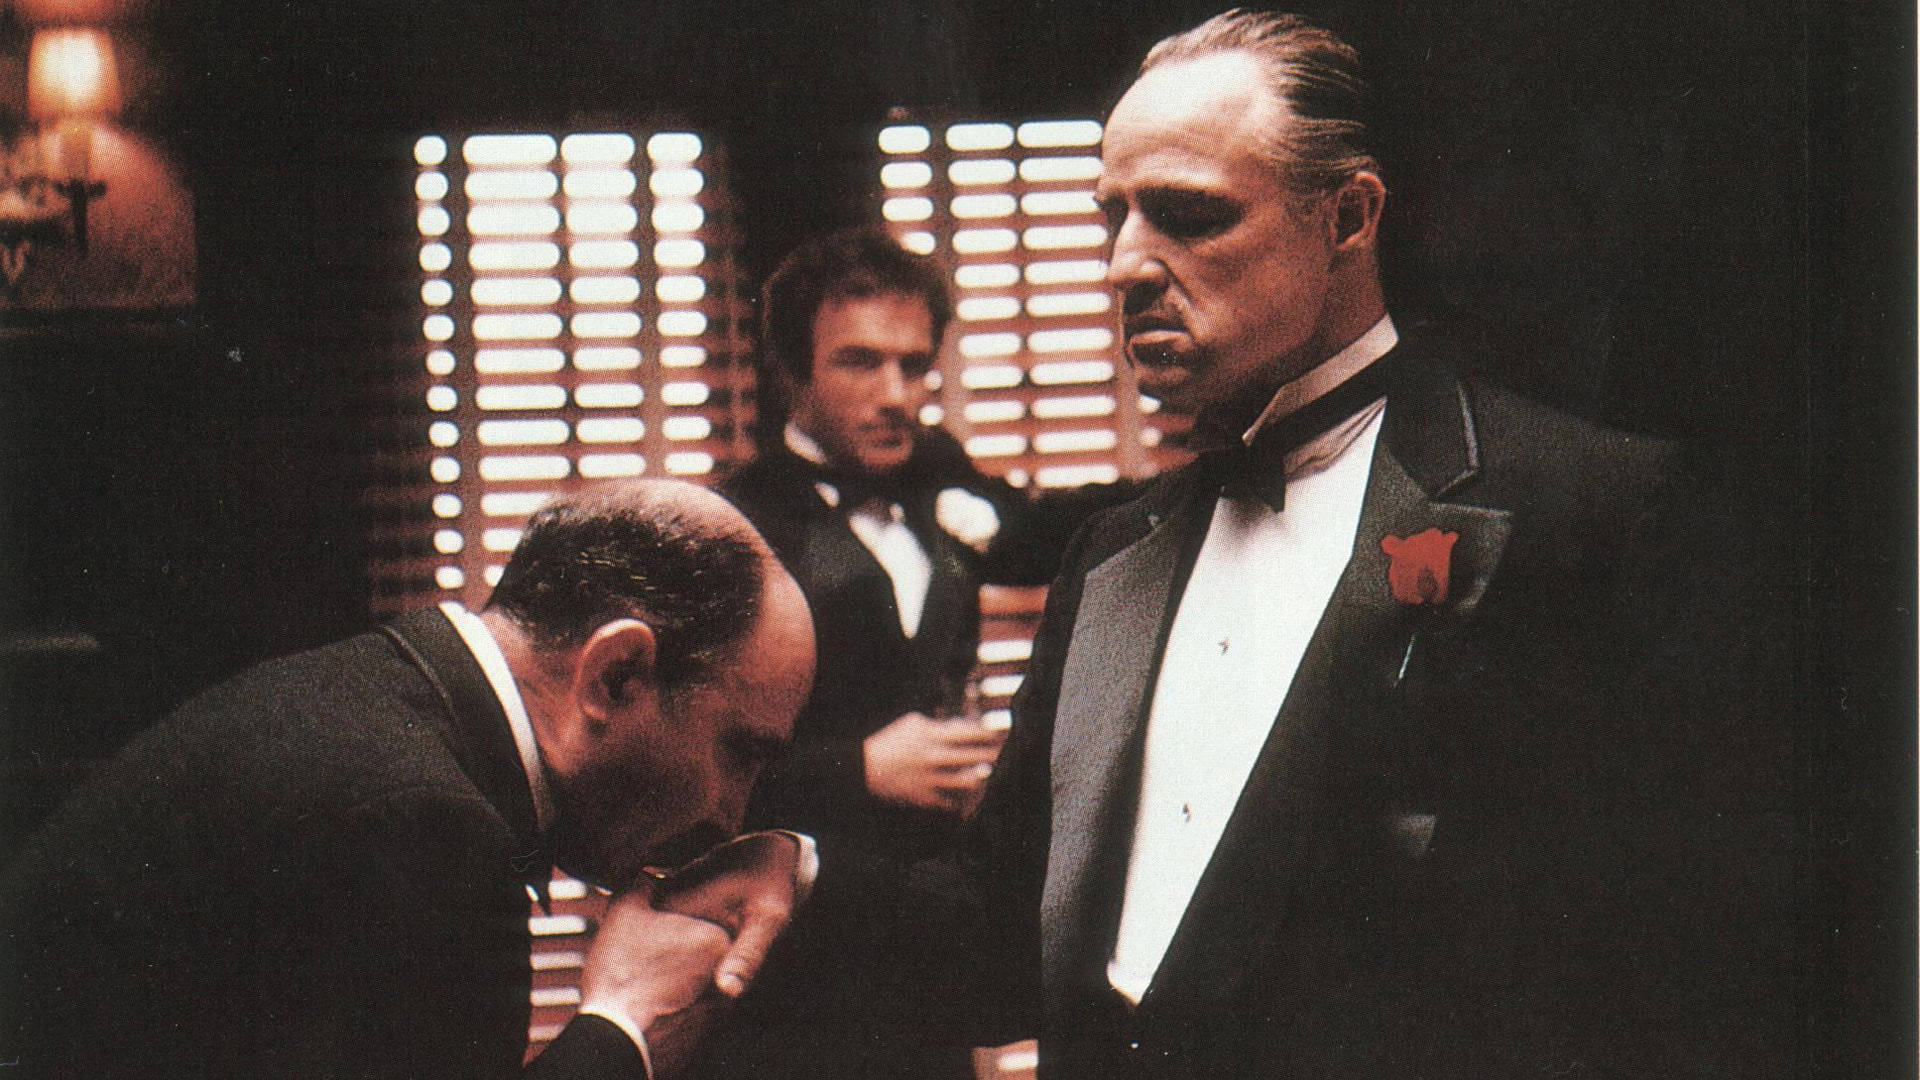 The Godfather Hintergrundbild 1920x1080. Download The Godfather Kissing The Hand Wallpaper